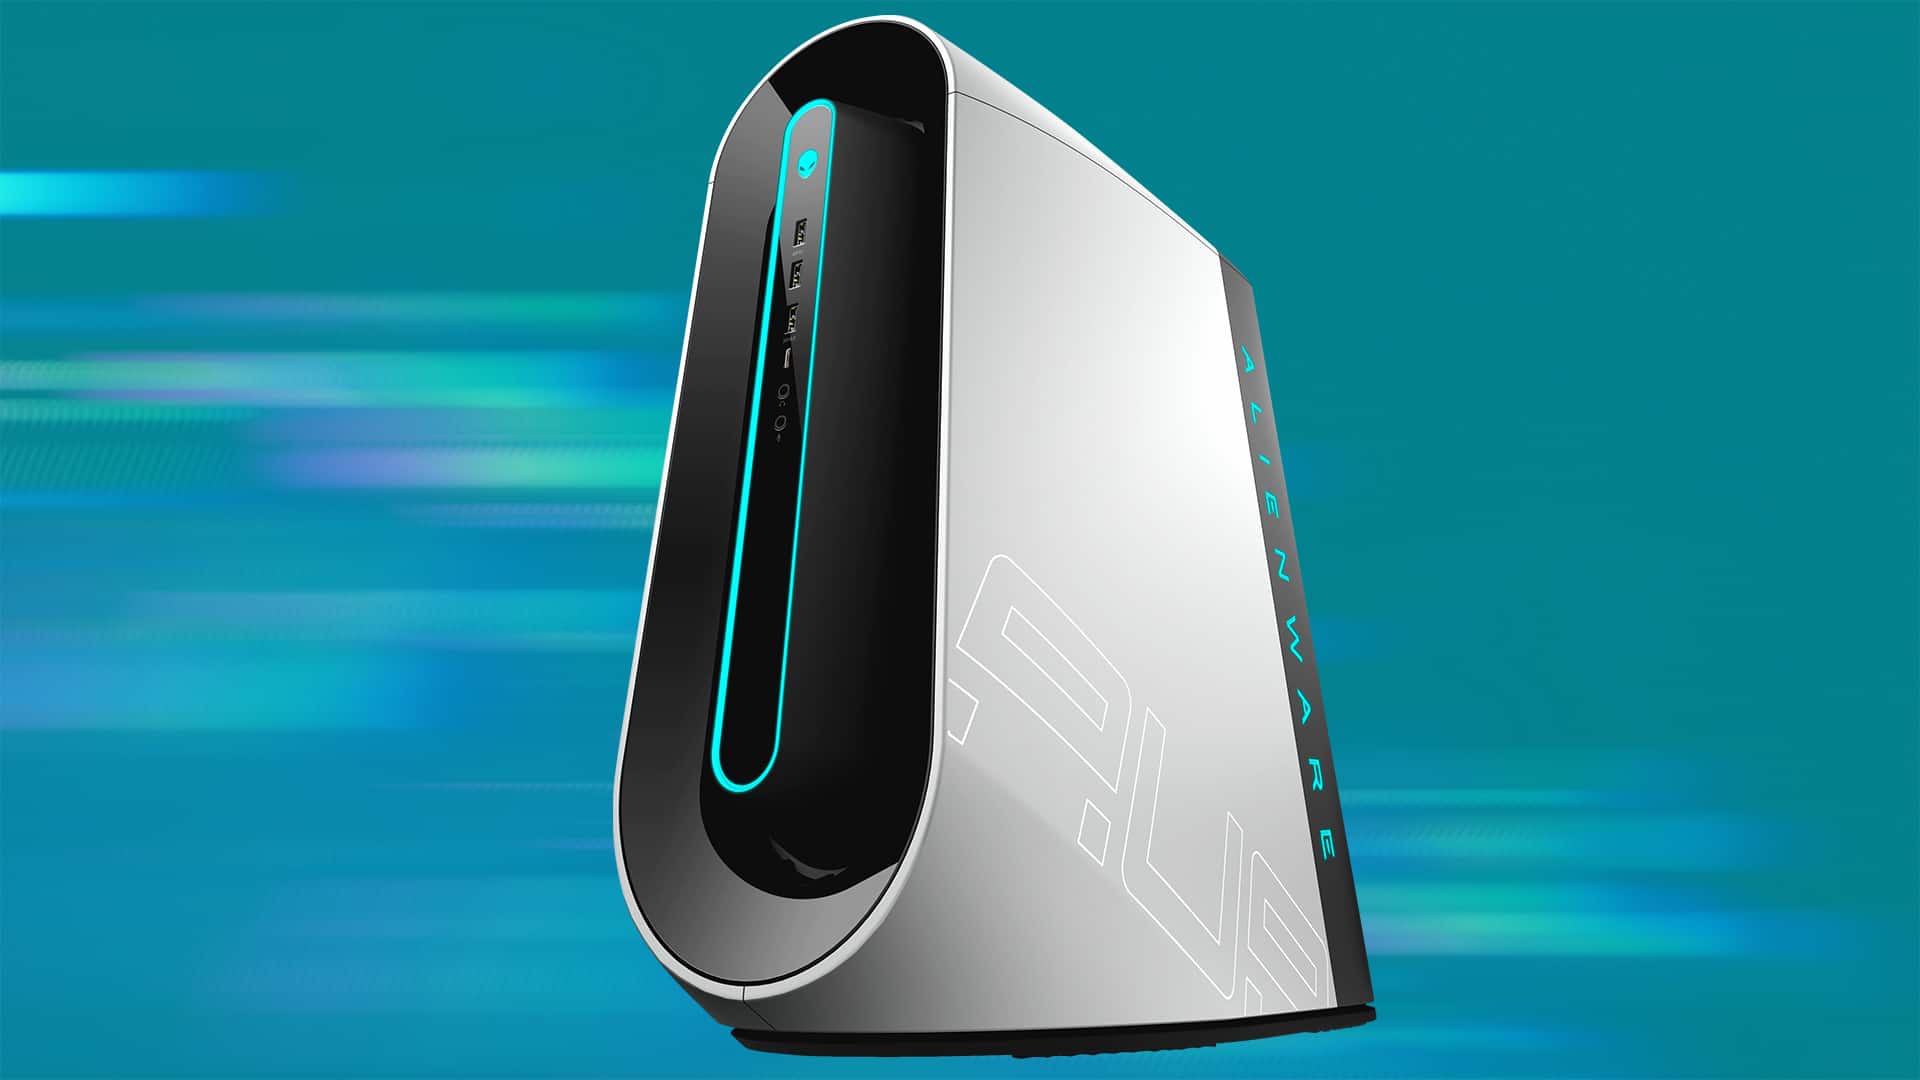 Alienware Aurora R11: One Of The Top Pre Built Gaming PCs On The Planet